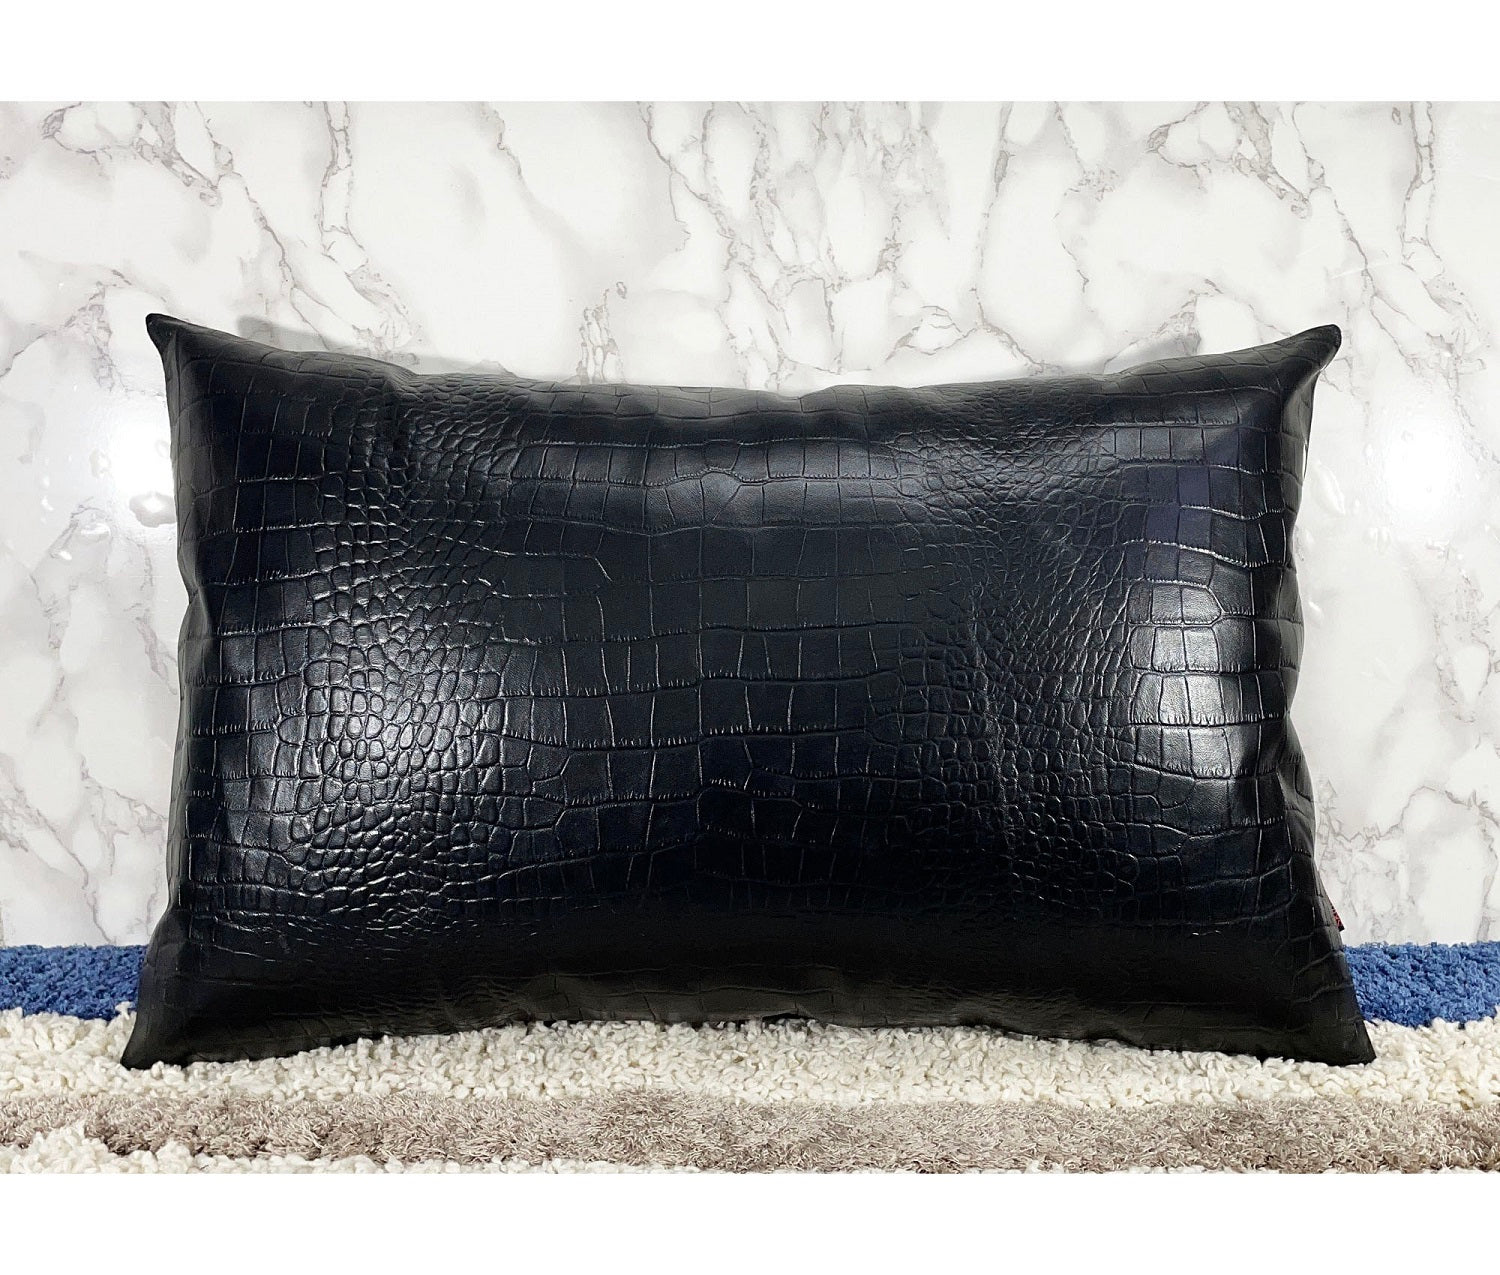 Genuine Leather Rectangle Pillow Cover 01 SkinOutfit